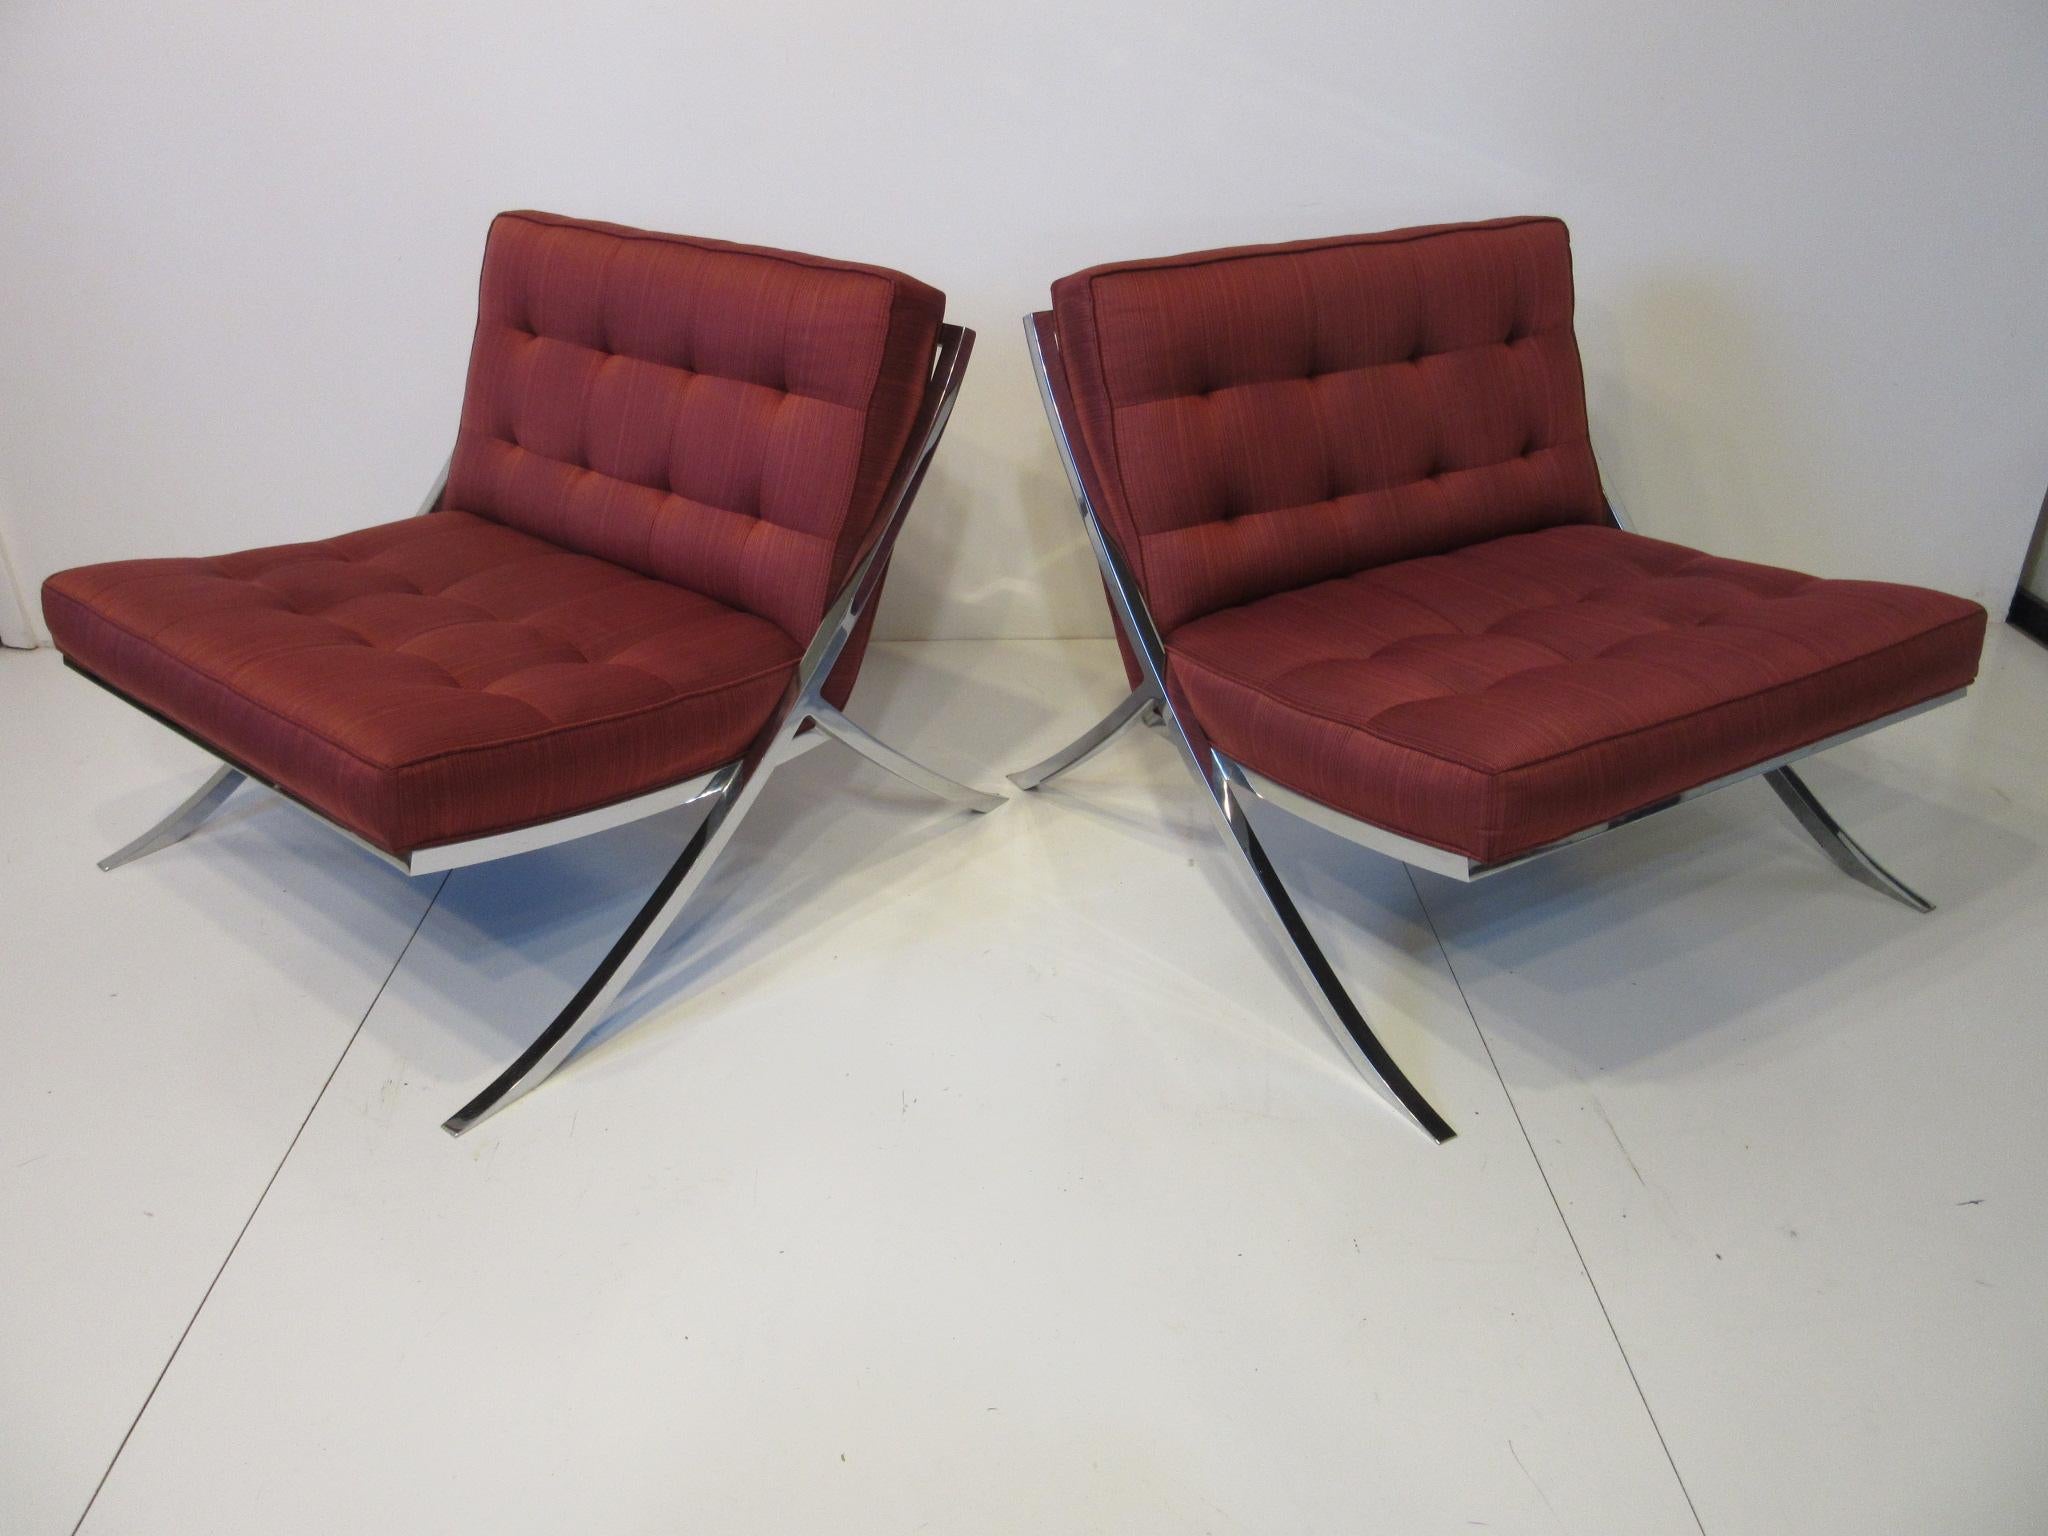 1970 Chromed Upholstered Saber Leg Lounge Chairs in a Knoll Barcelona Style   3